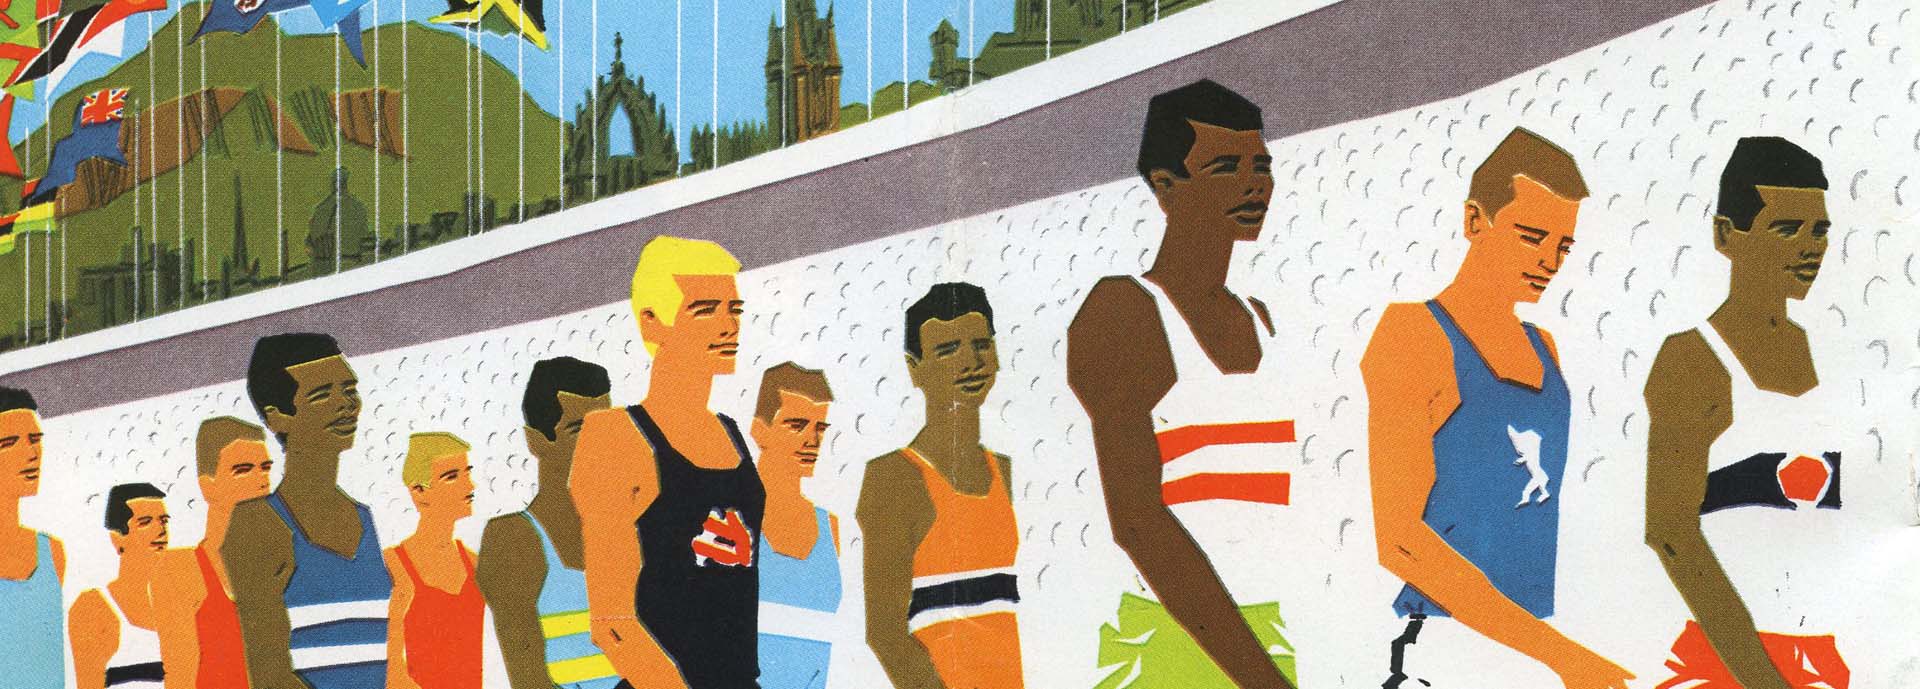 Commonwealth games poster